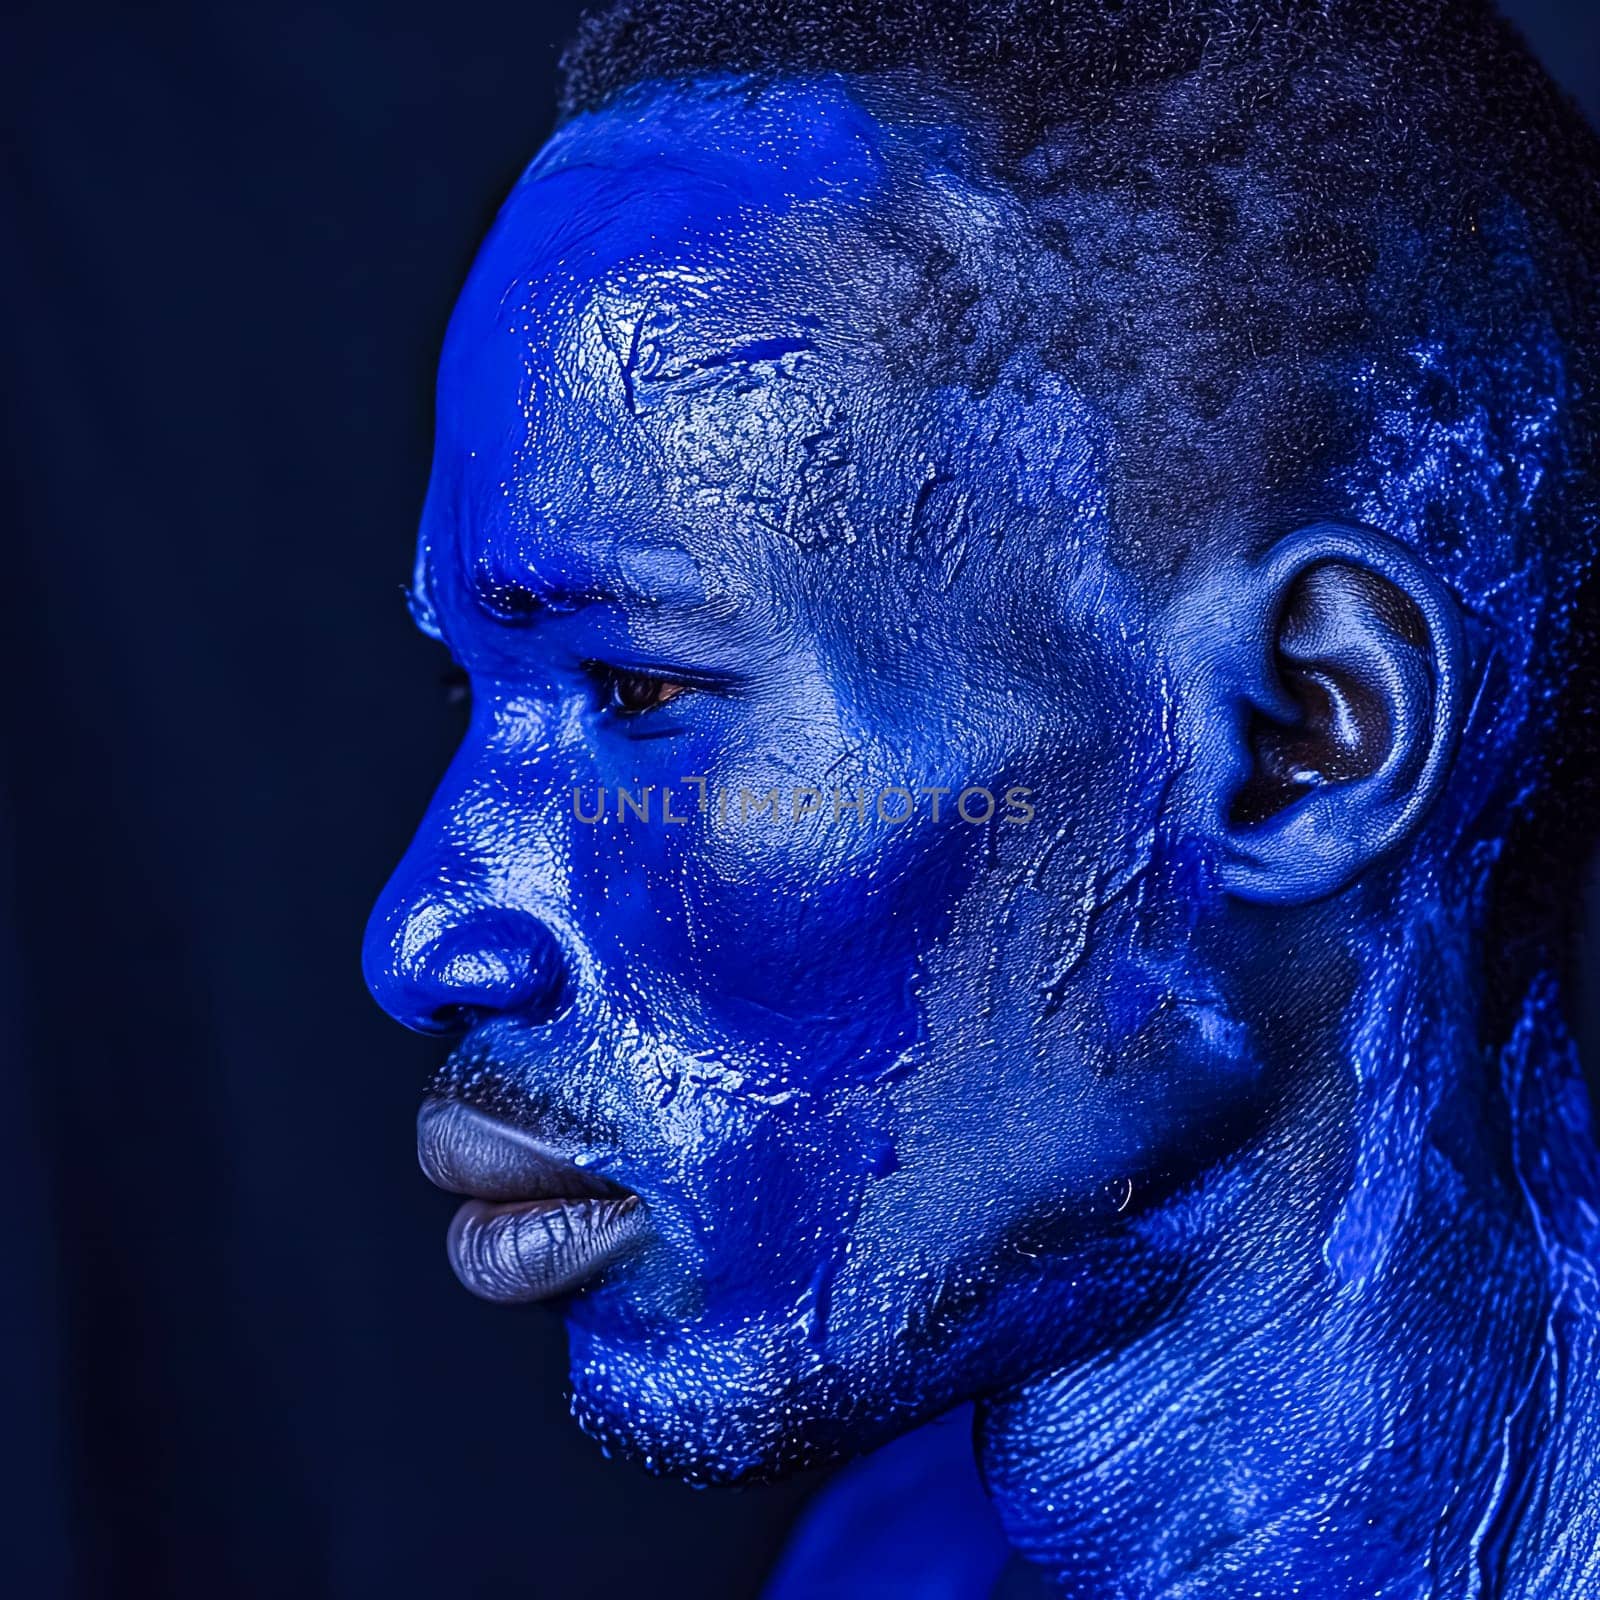 an African man adorned in vibrant blue paint by Alla_Morozova93